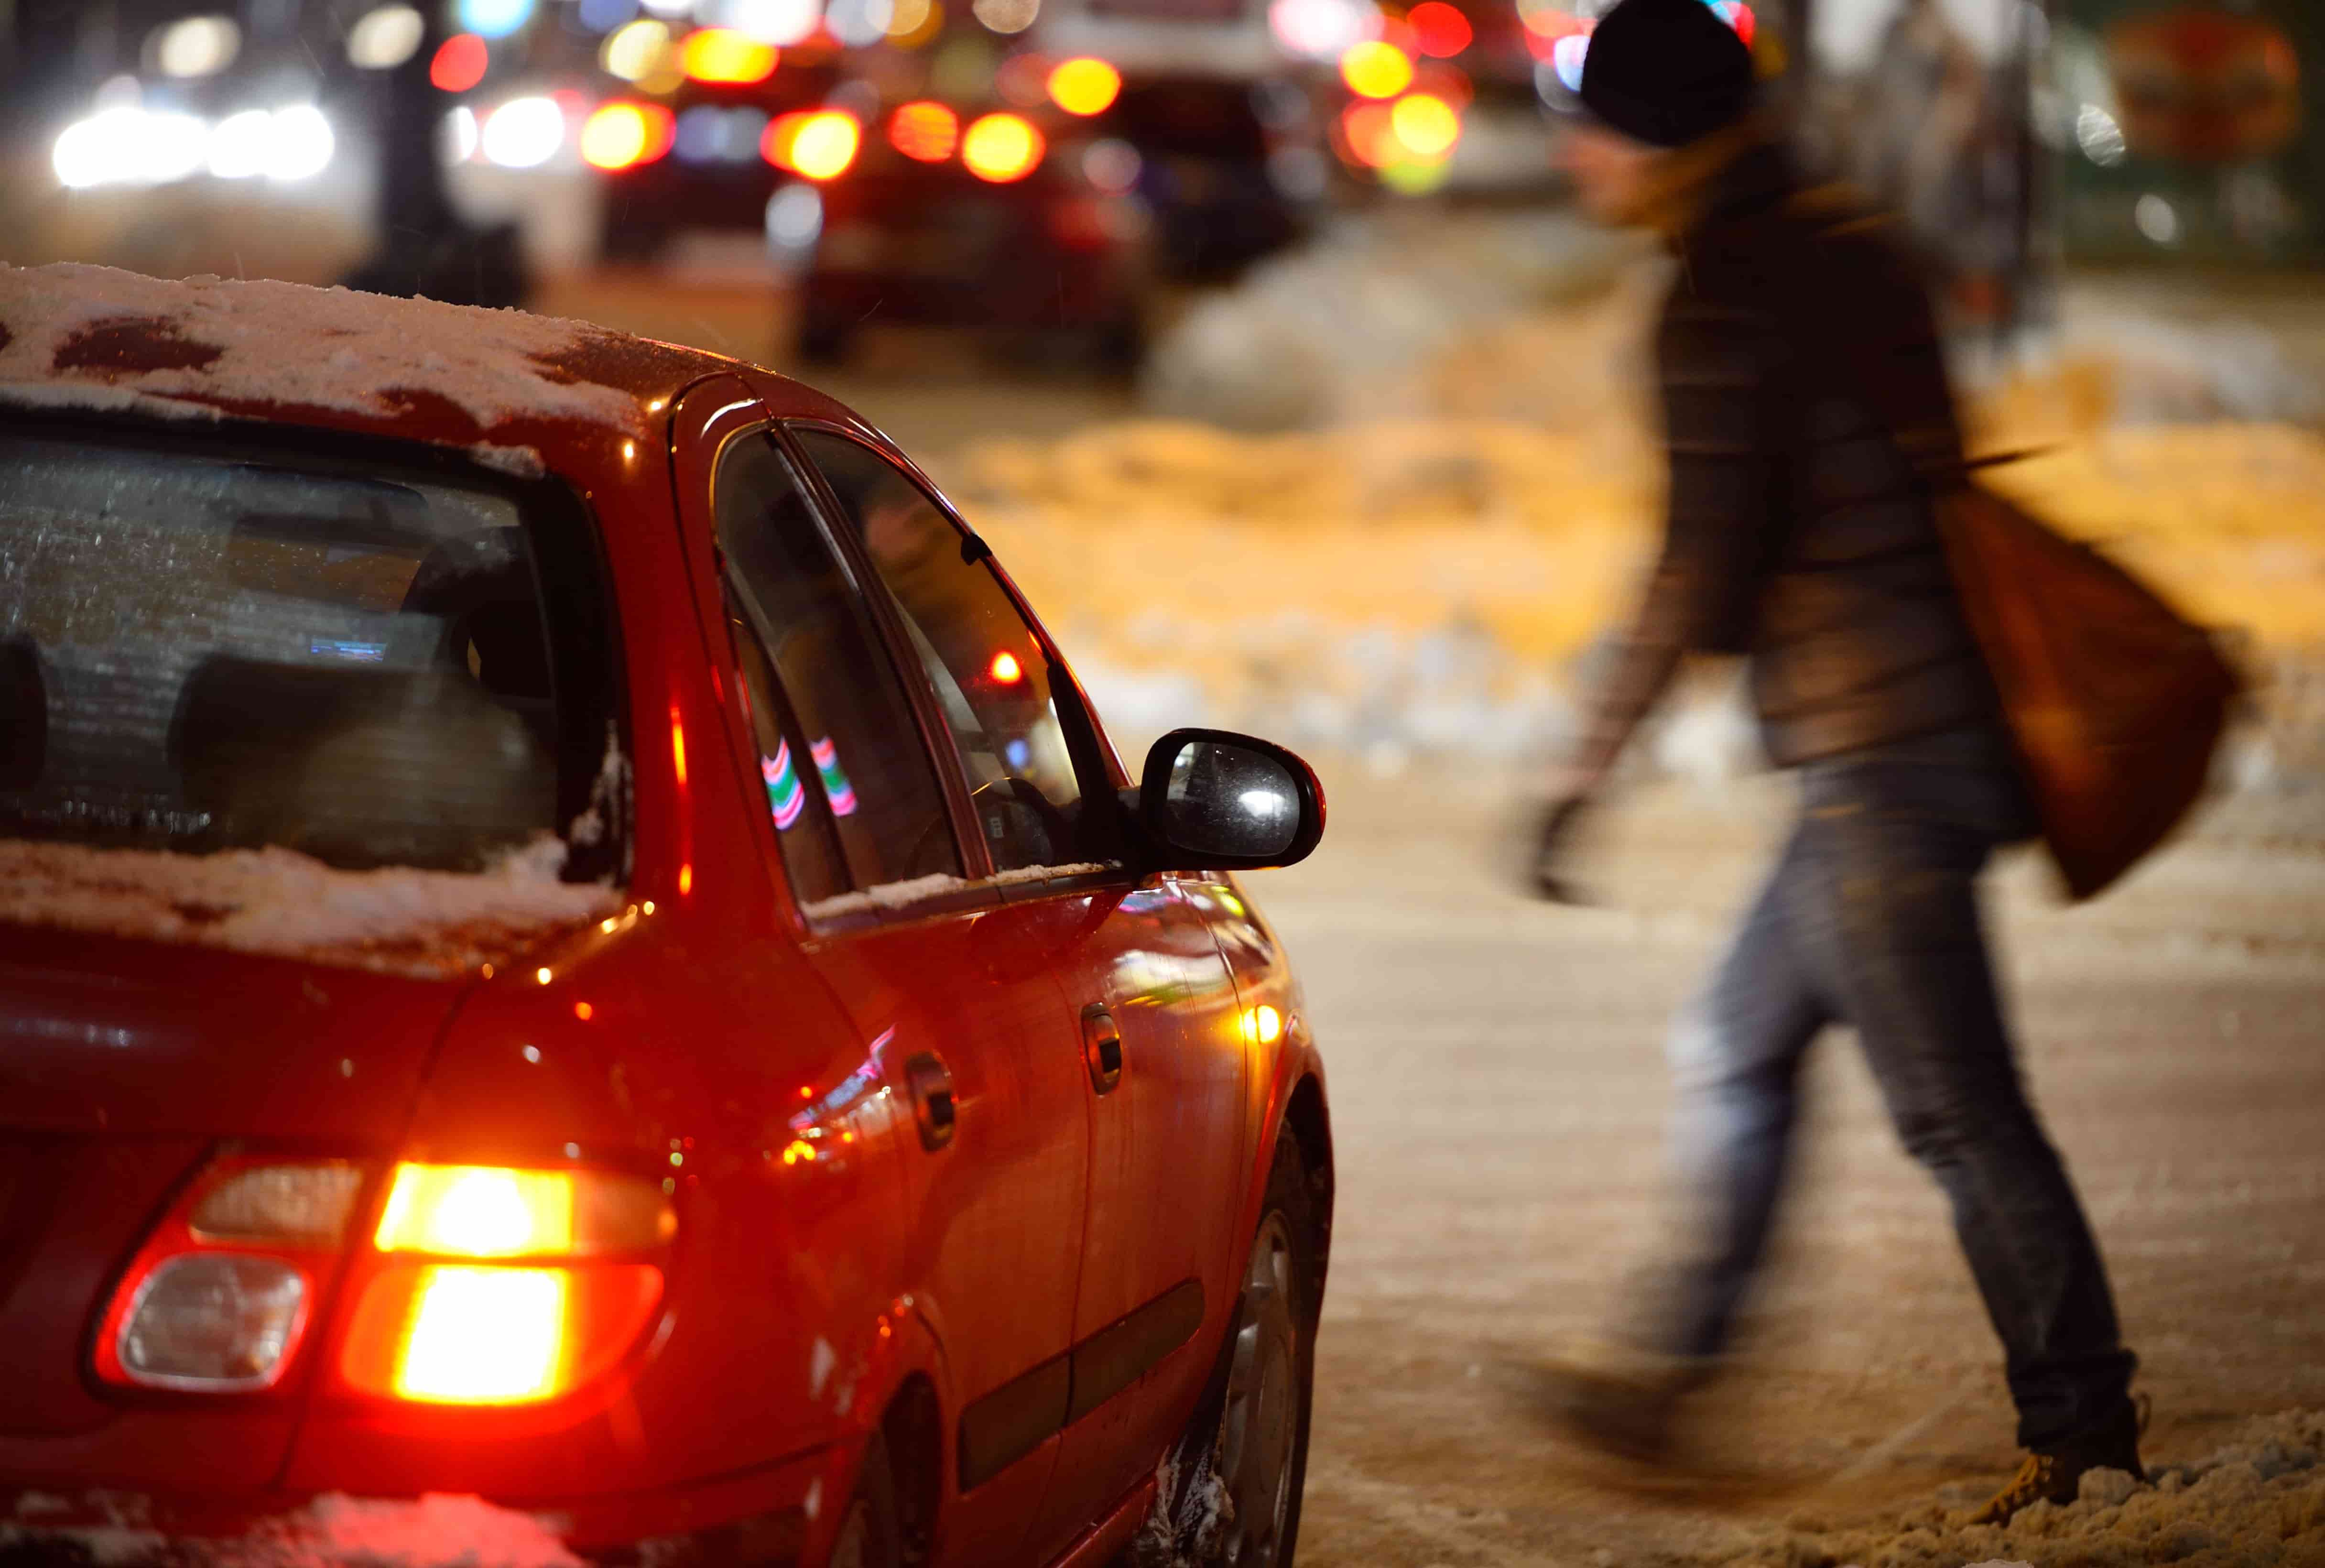  Pedestrians and cyclists, here's how to stay safe and visible if you use the roads in winter.